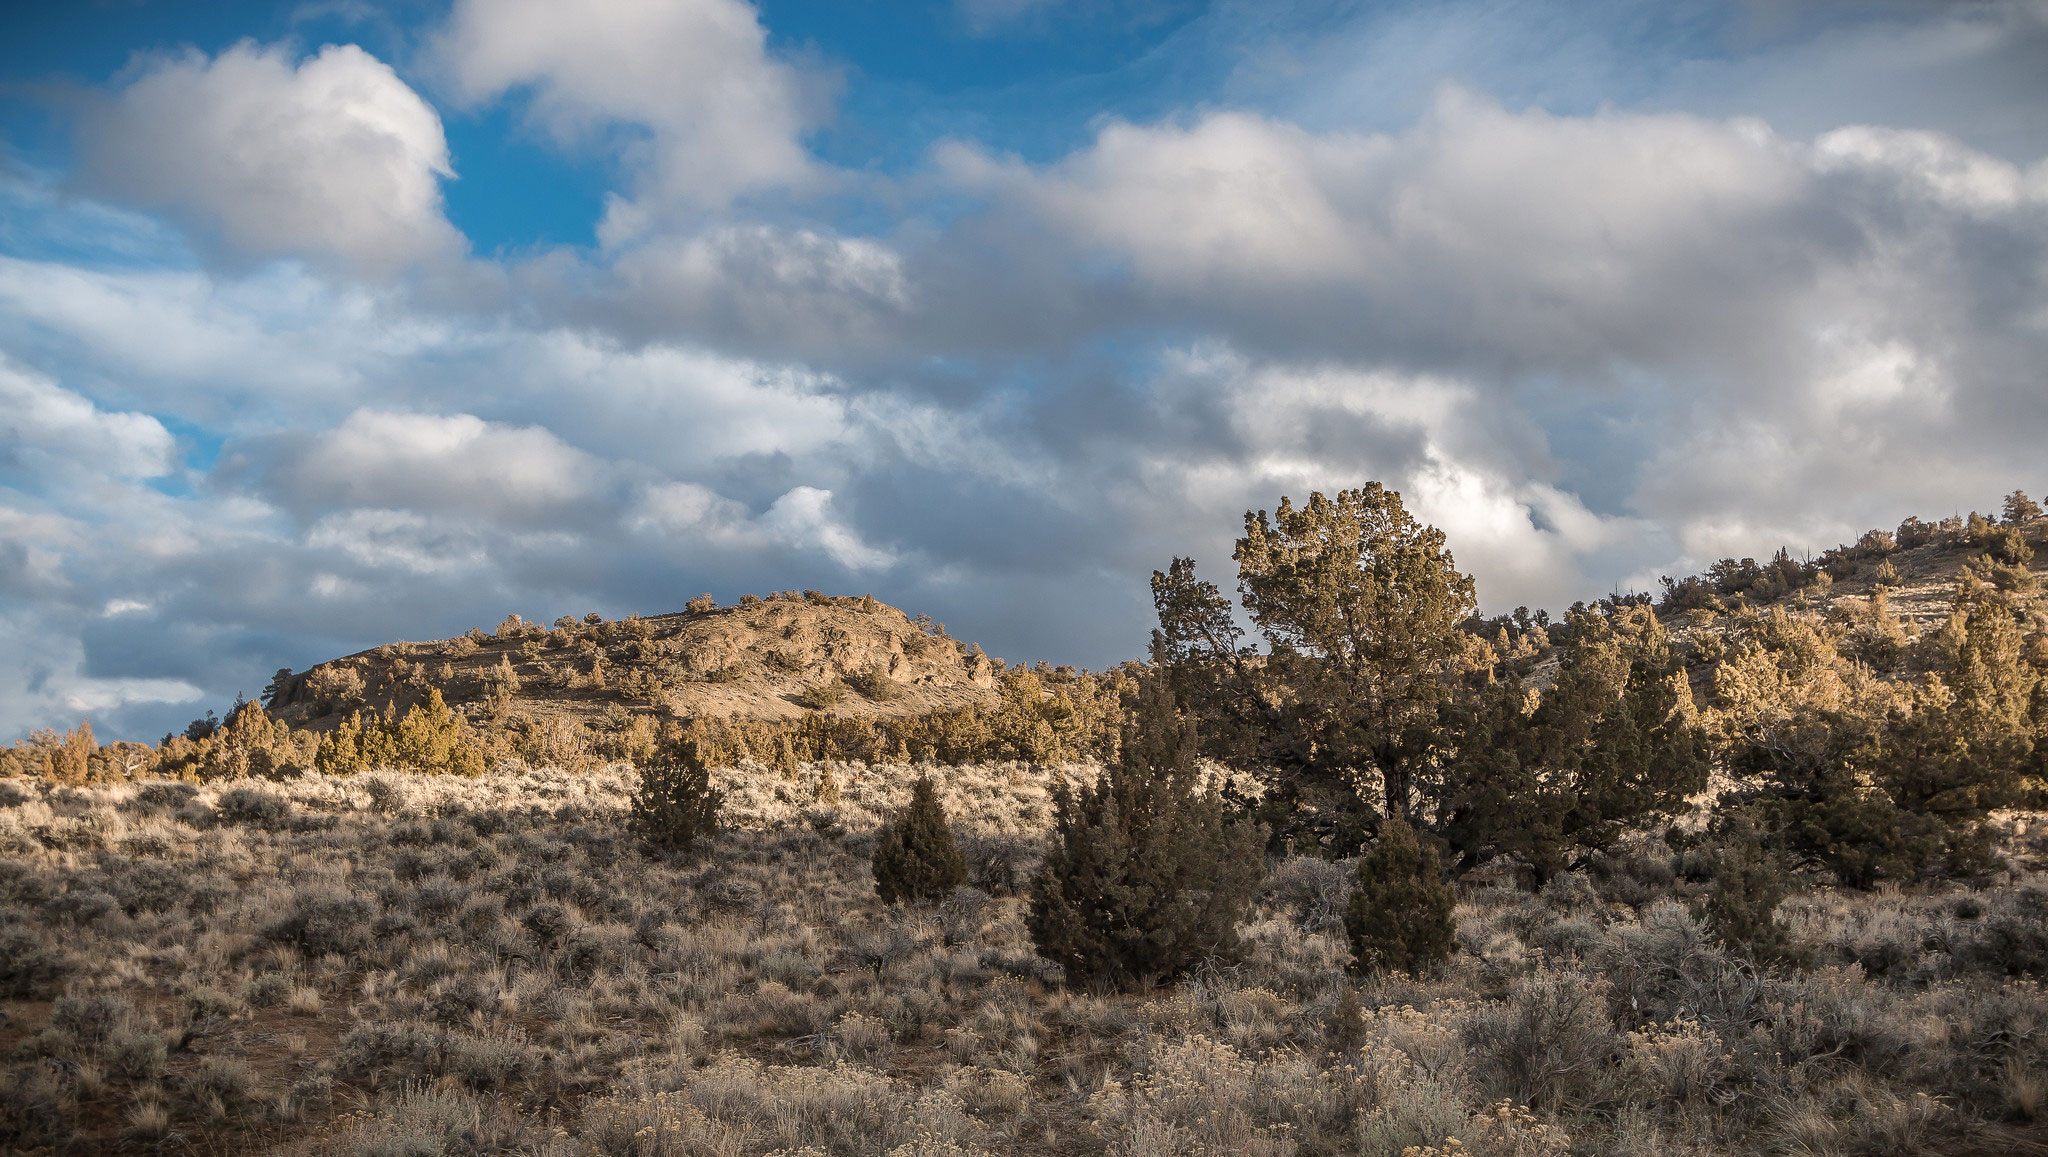 High desert landscape with sagebrush and cloudy blue sky. 